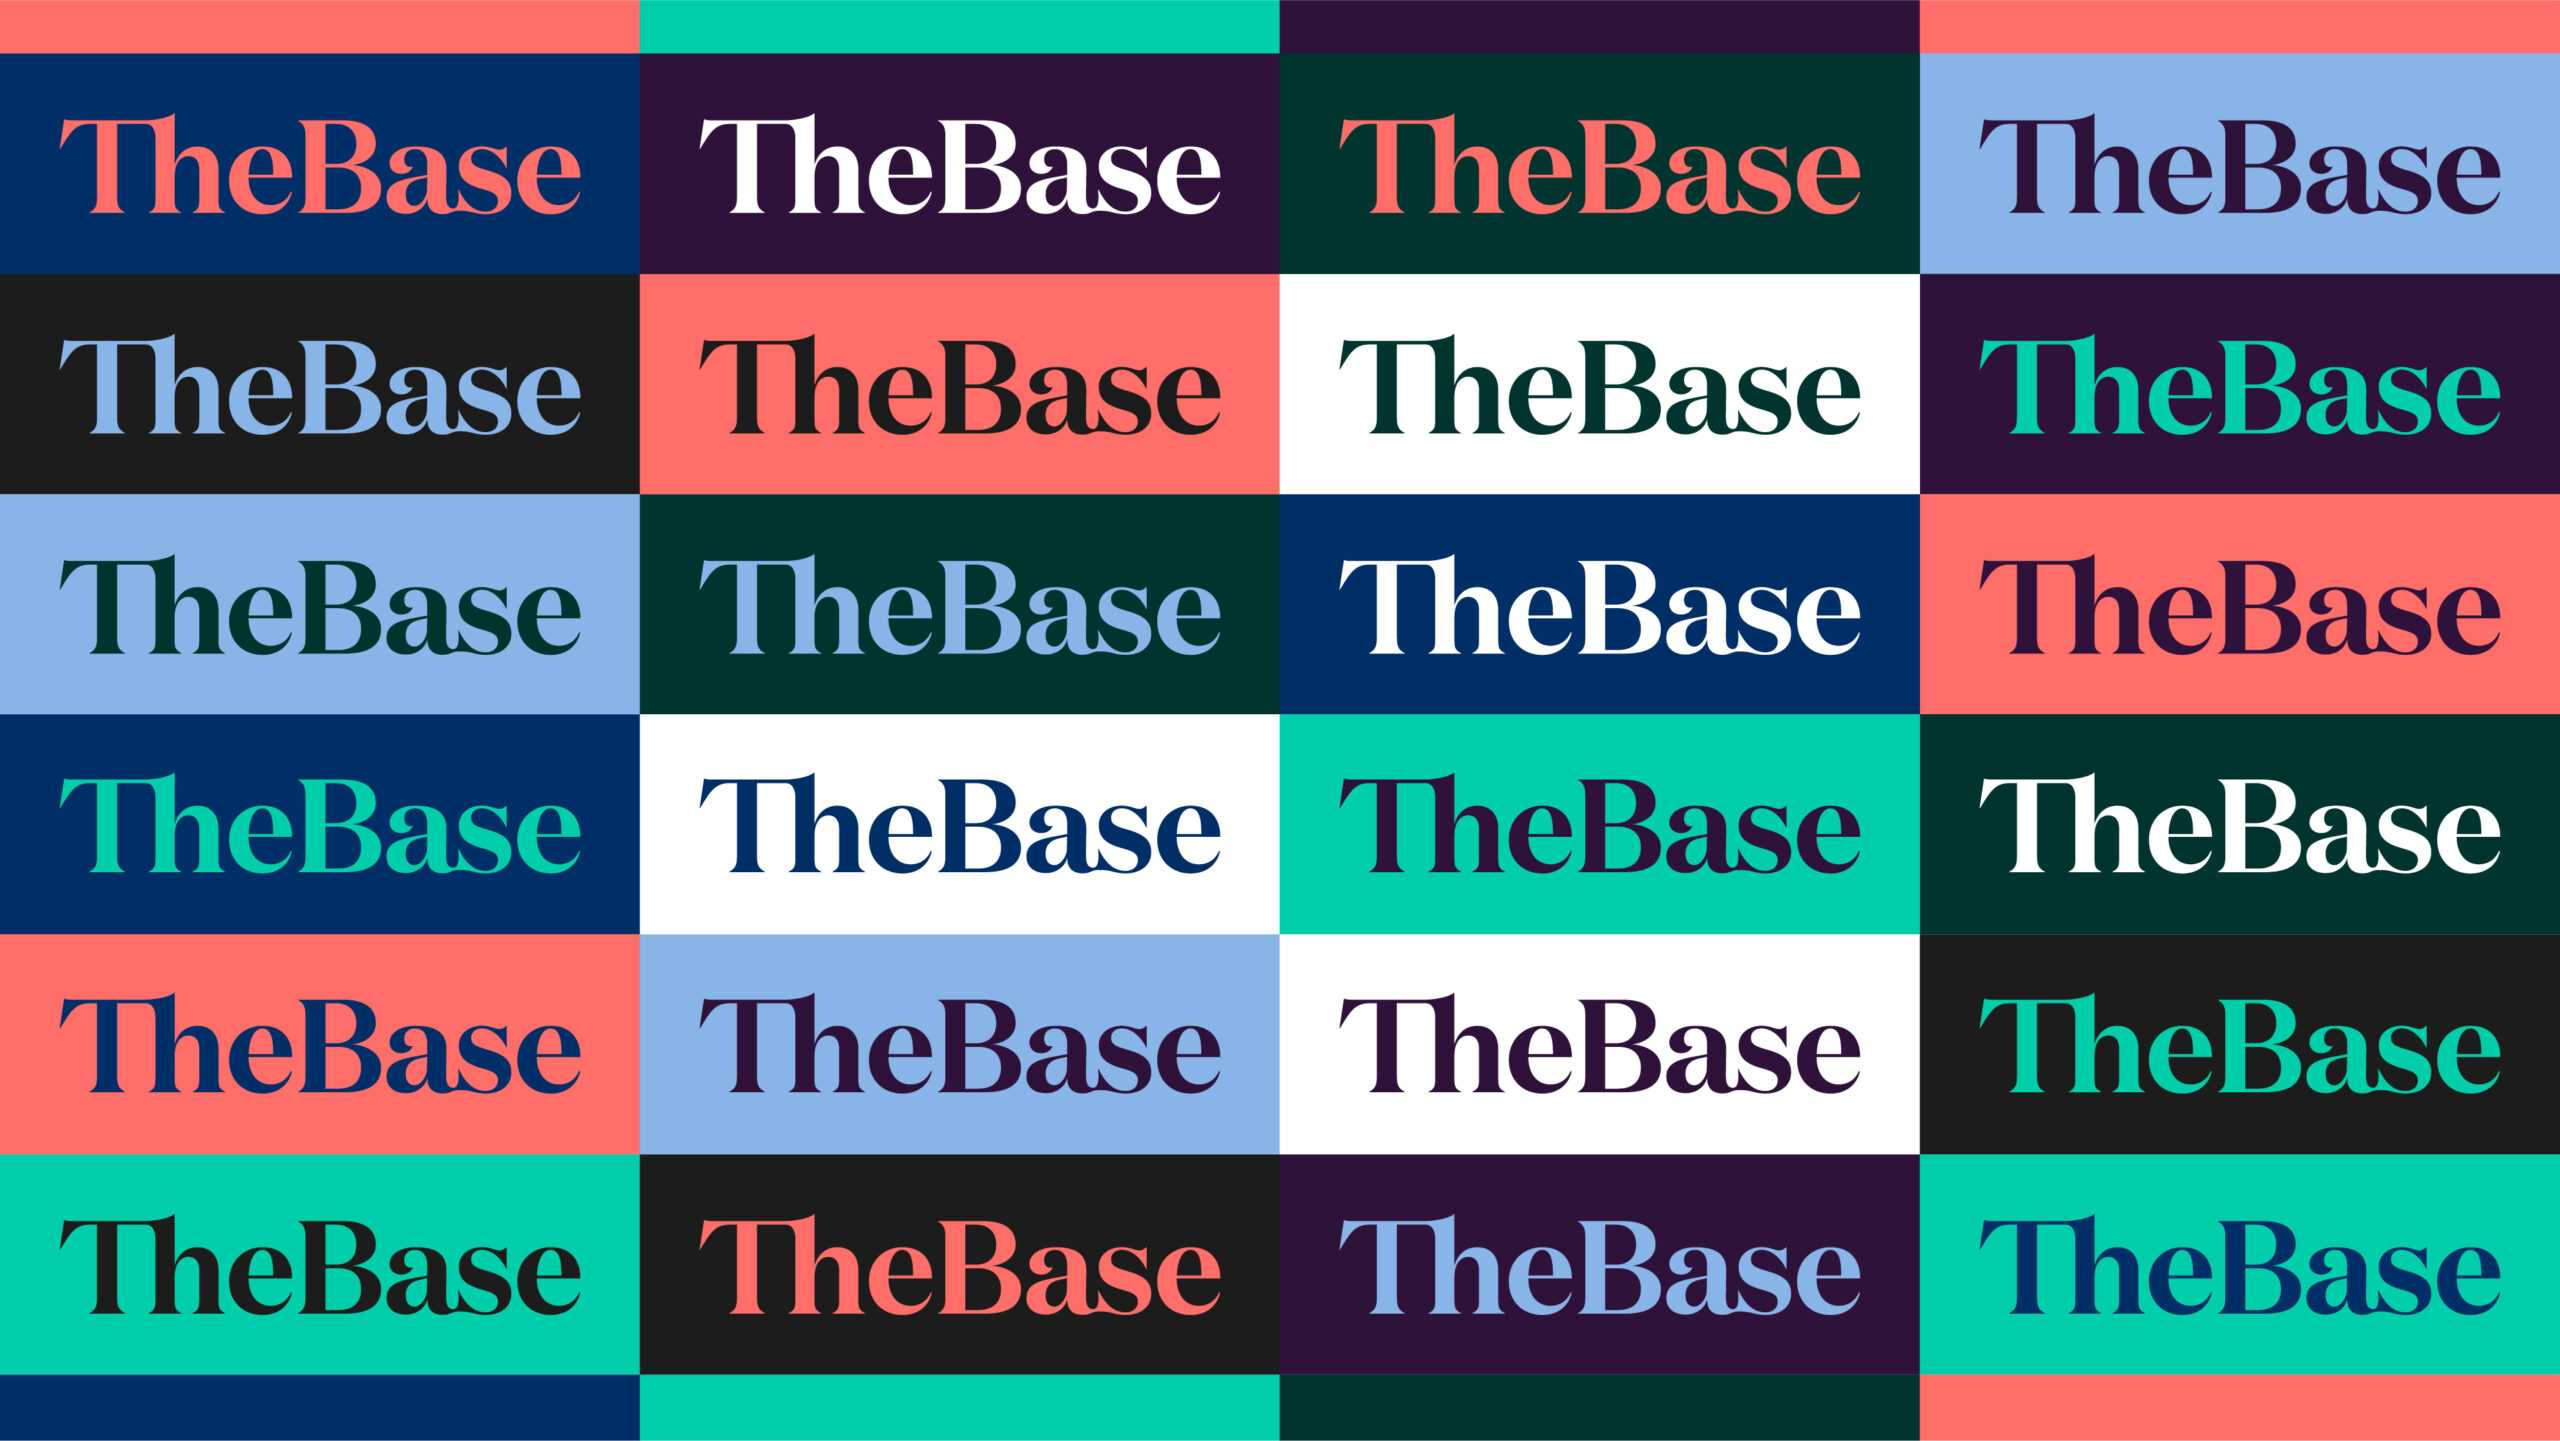 DIfferent color variatons of The Base logo